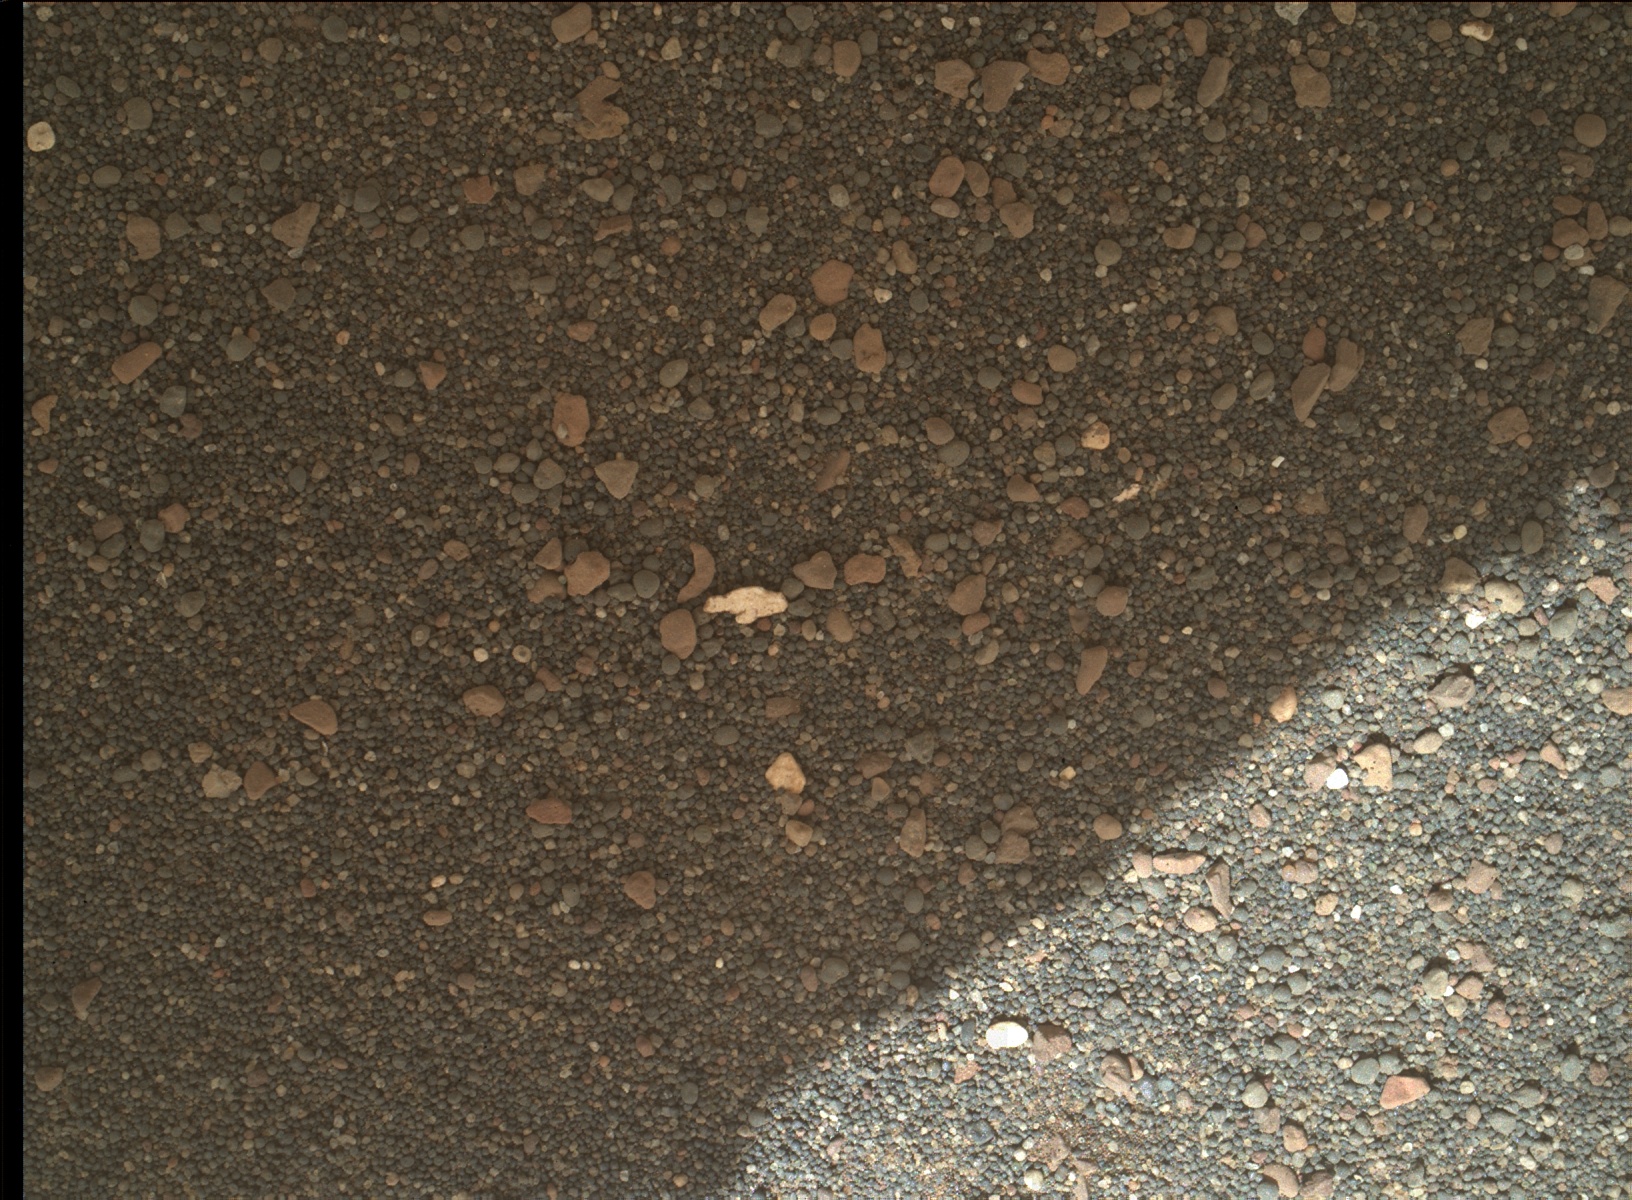 Nasa's Mars rover Curiosity acquired this image using its Mars Hand Lens Imager (MAHLI) on Sol 2411